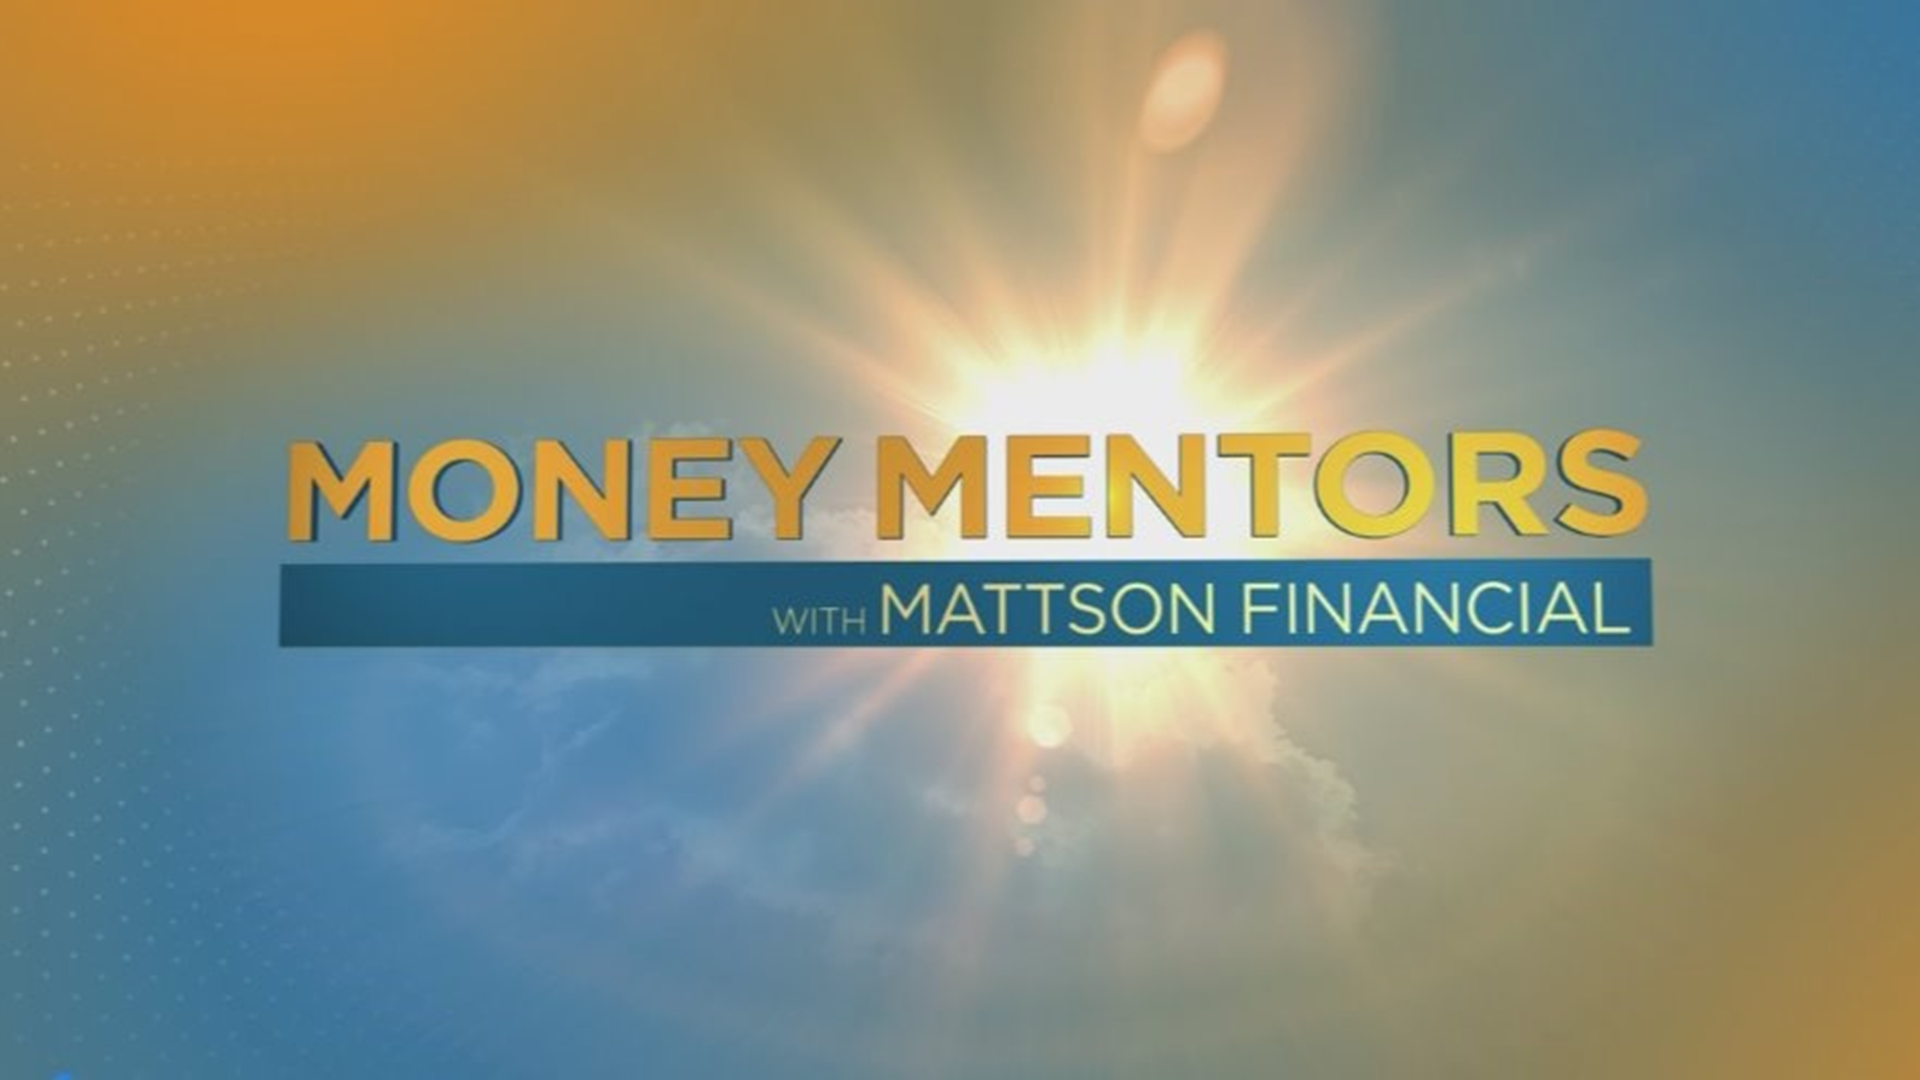 While considerable time has passed since the last market crash, there are still people today facing the challenges from losing their money. We sat down with Gary Mattson and Laurel Steward to learn more about ensuring the survival of our portfolio.